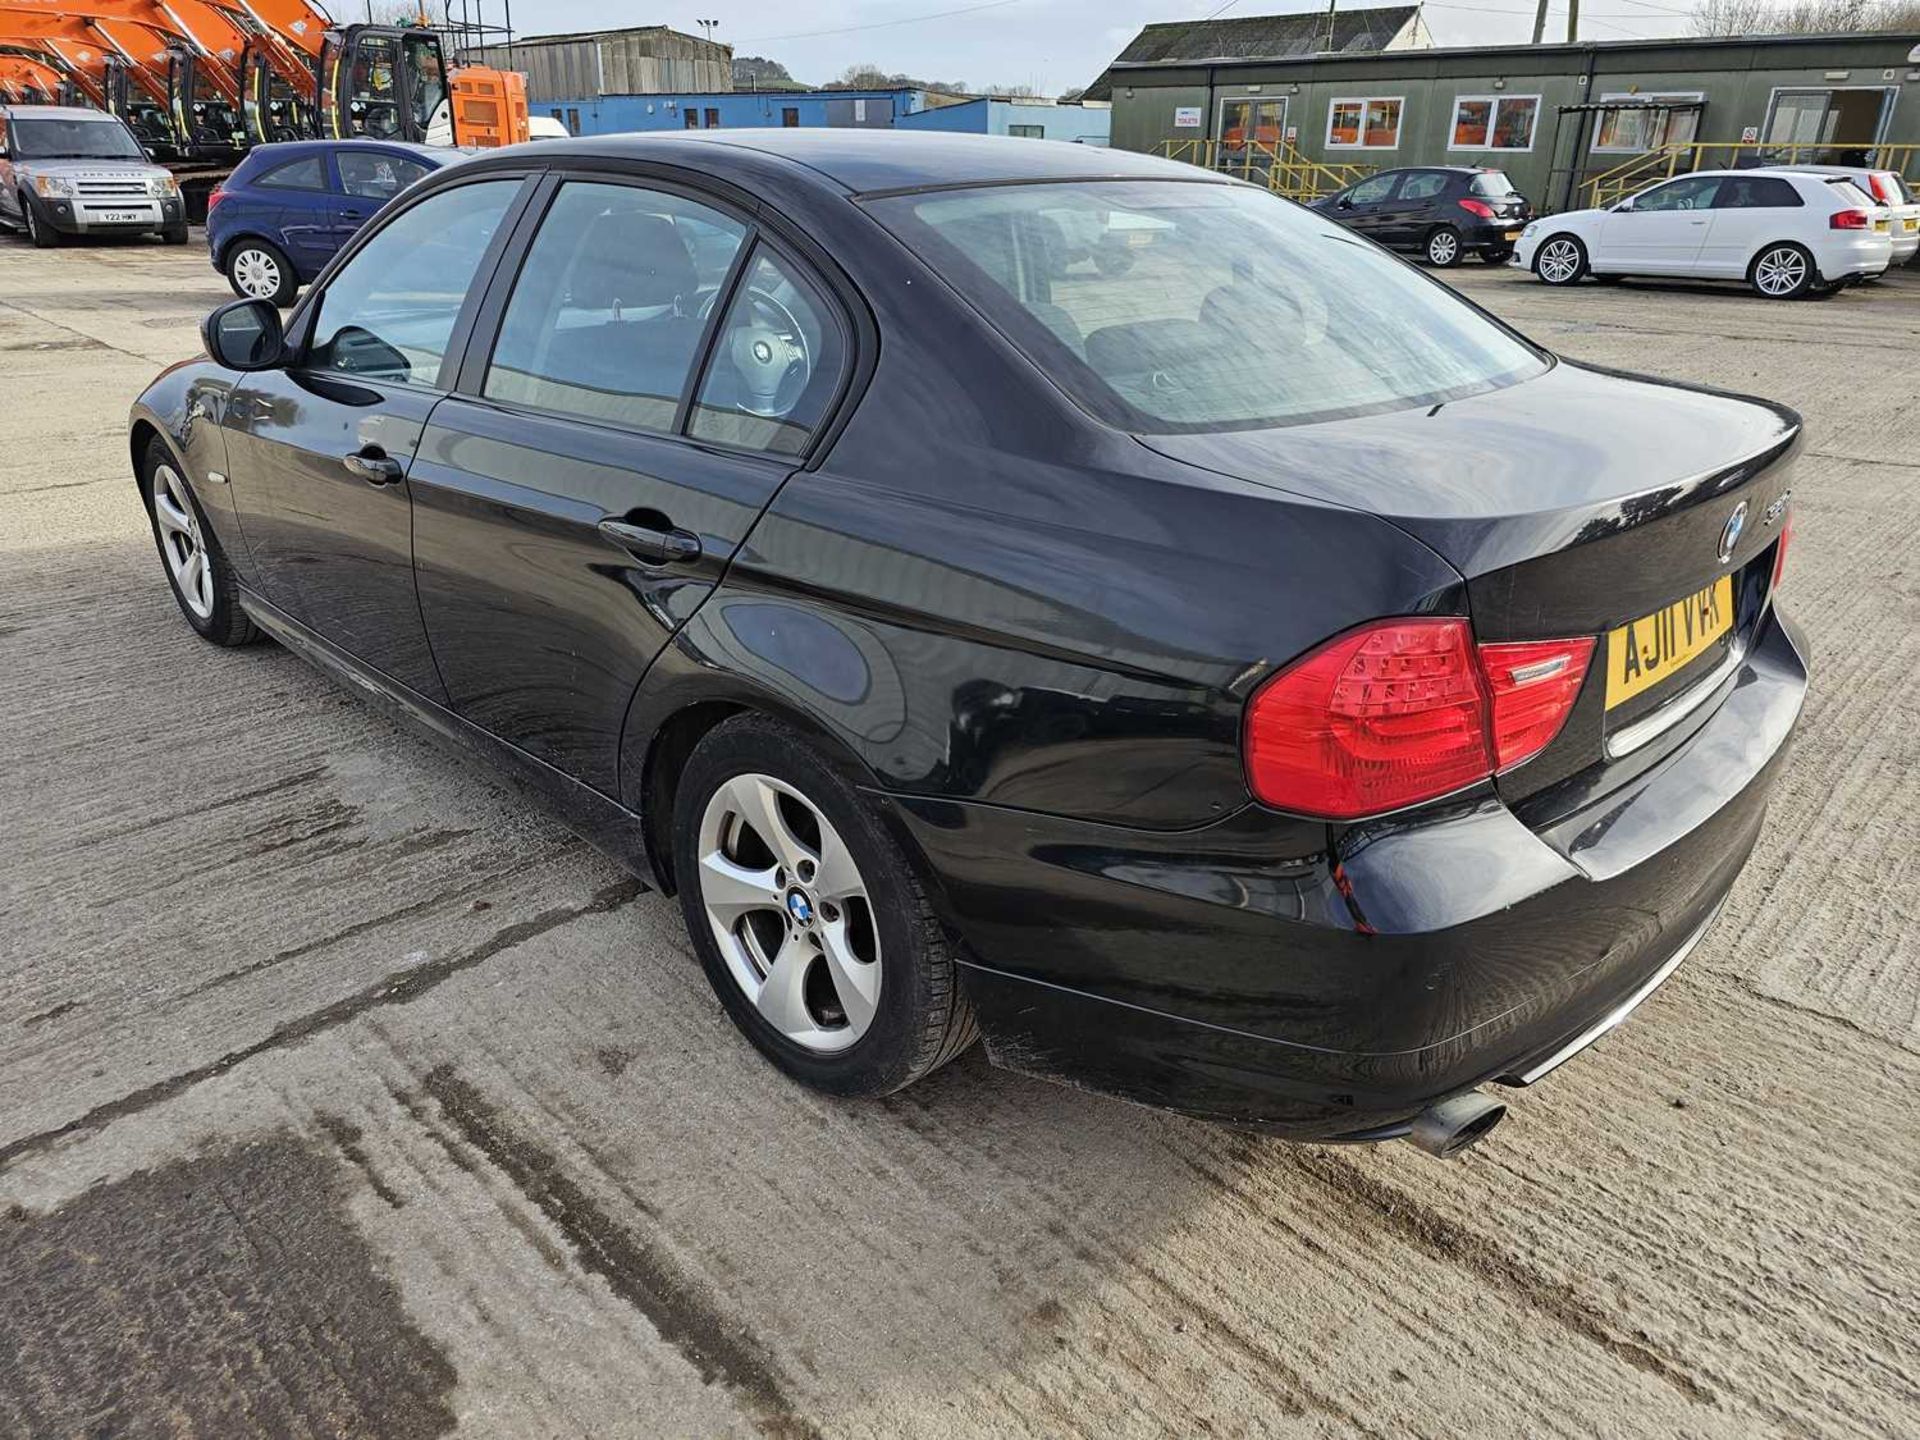 2011 BMW 320D, 6 Speed, Parking Sensors, Bluetooth, A/C (NO VAT)(Reg. Docs. Available, Tested 01/25) - Image 3 of 28